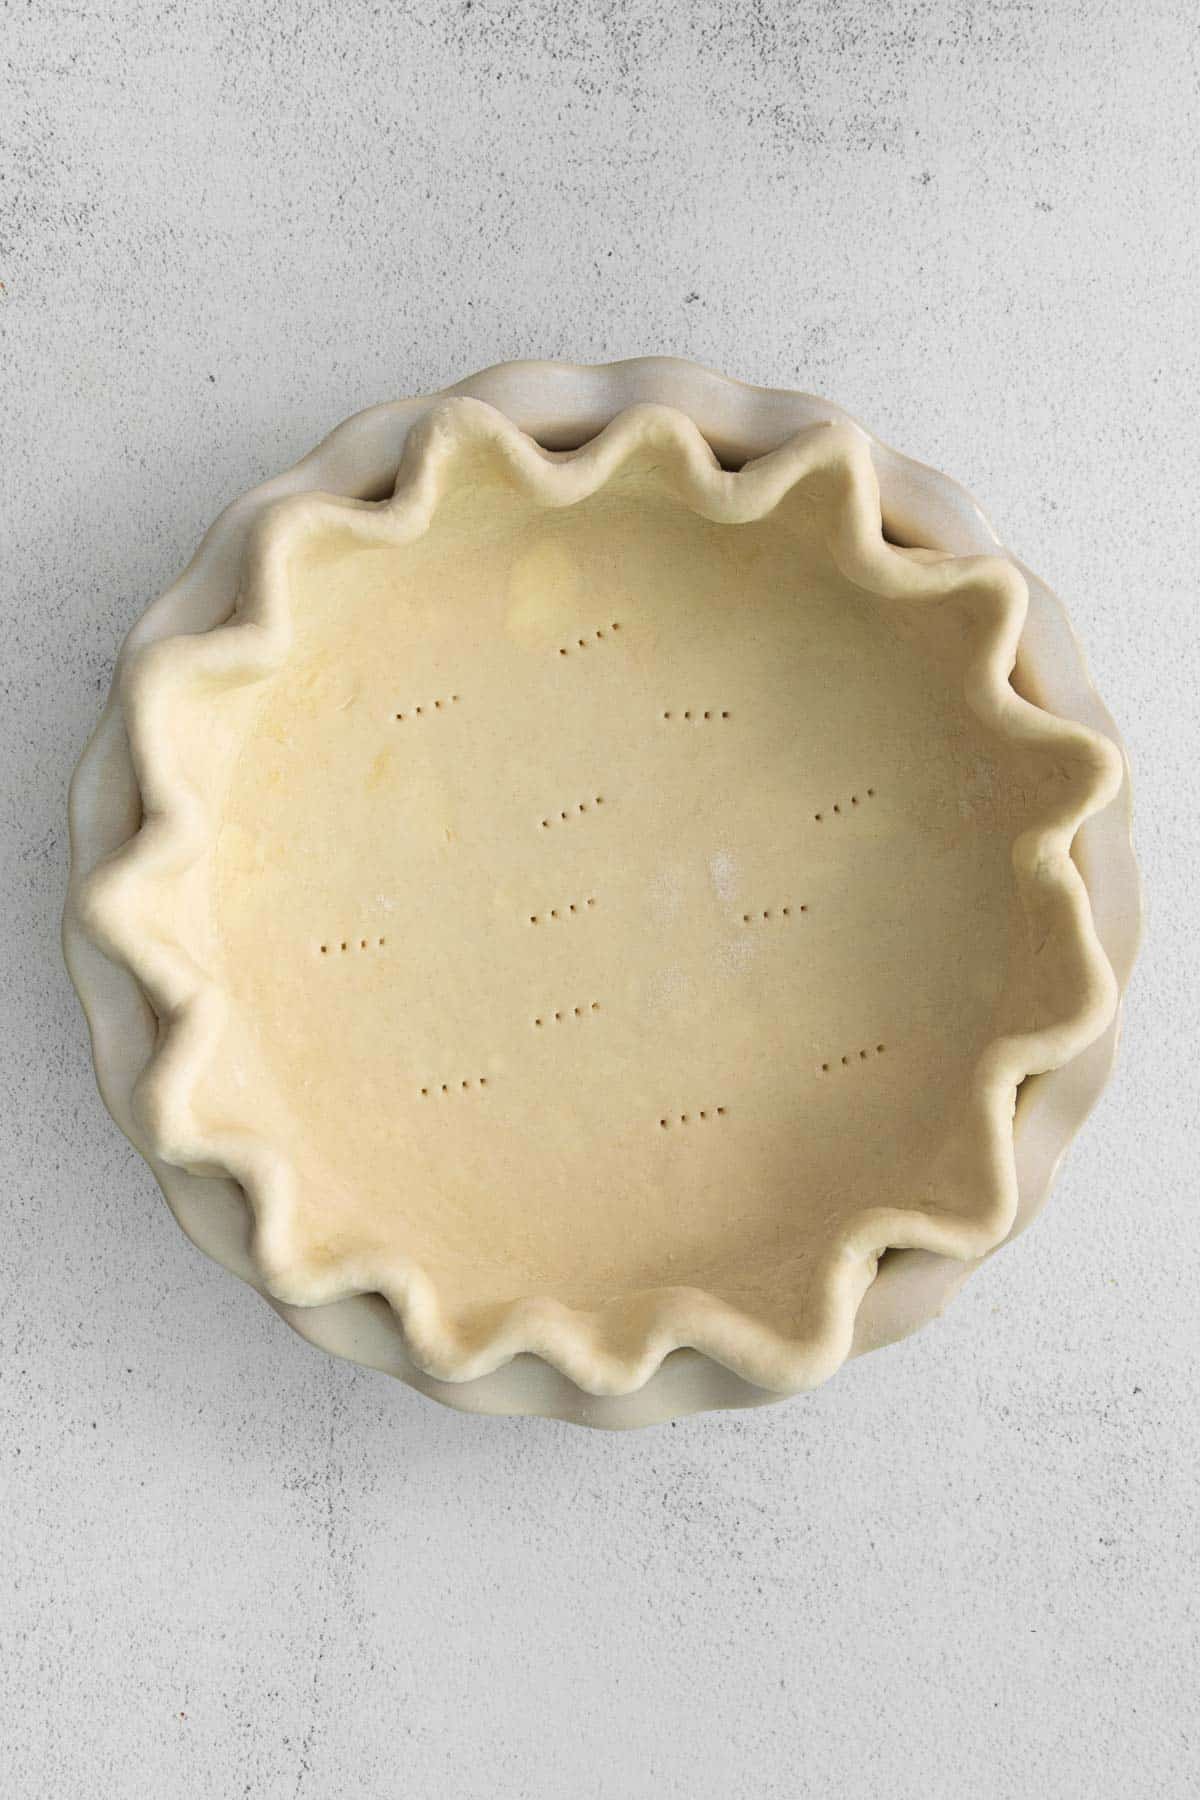 uncooked pie crust with crimped edges in a pie plate.